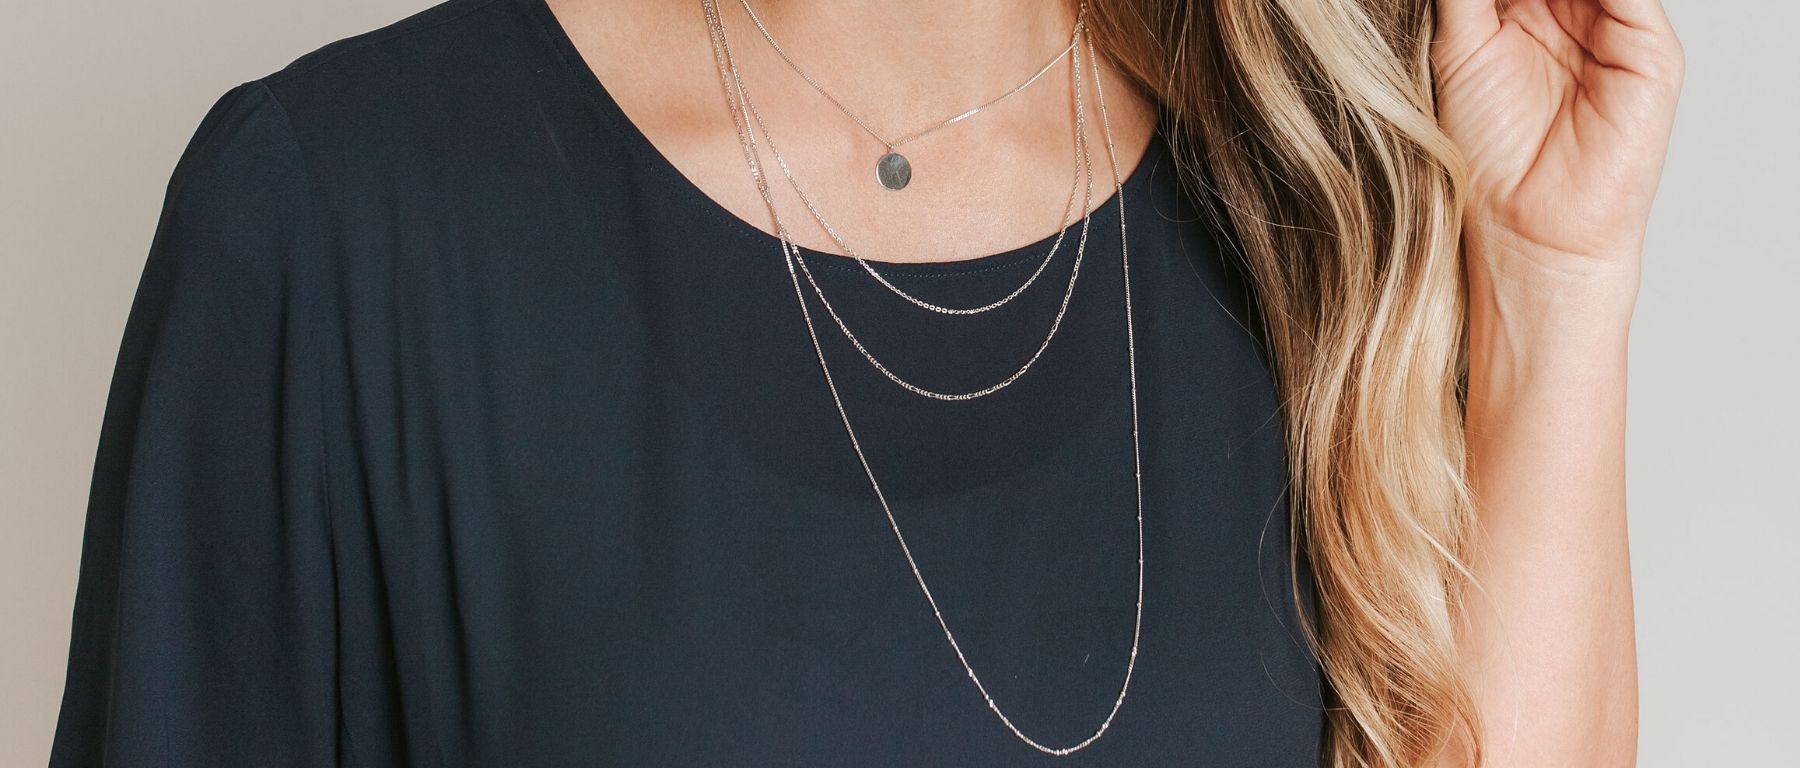 8 Benefits of Wearing Silver Necklaces with Your Outfits